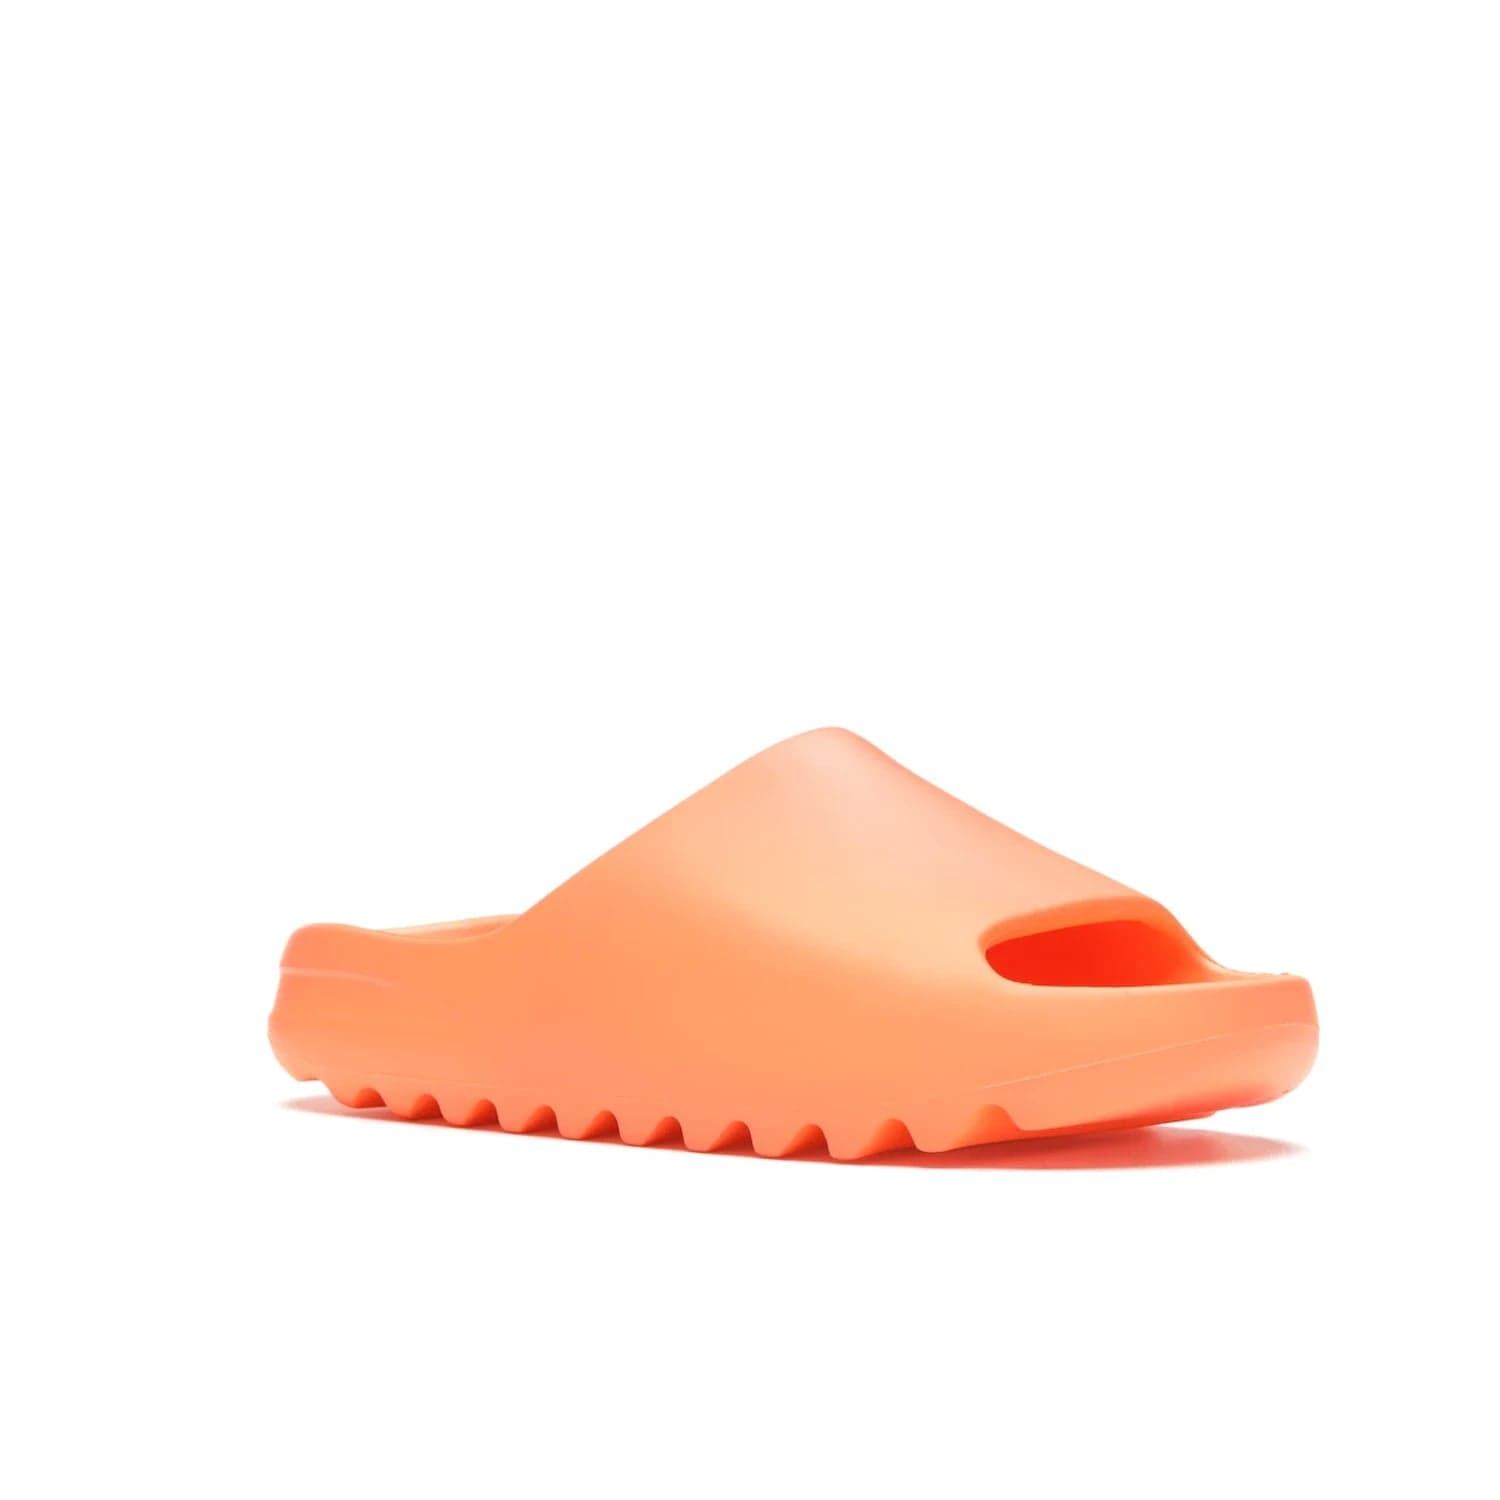 adidas Yeezy Slide Enflame Orange - Image 5 - Only at www.BallersClubKickz.com - Limited edition adidas Yeezy Slide featuring a bold Enflame Orange upper and EVA foam construction. Grooved outsole for traction and support. Released June 2021. Perfect for summer.